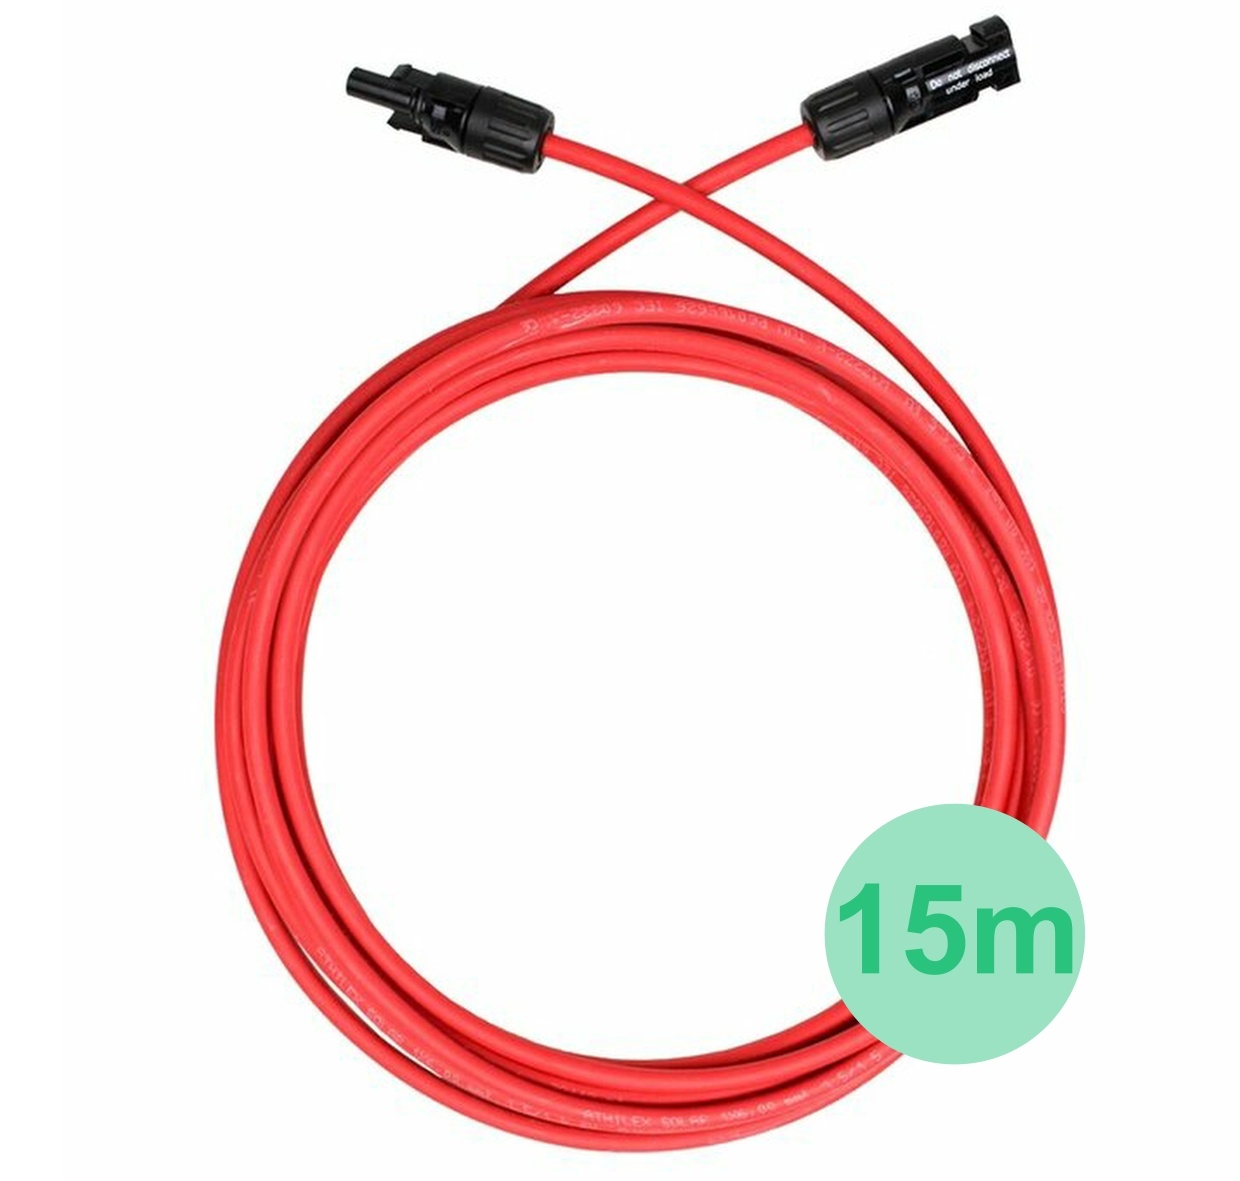 30' 10AWG MC4 Extension Cable, Dual, Combined Cable